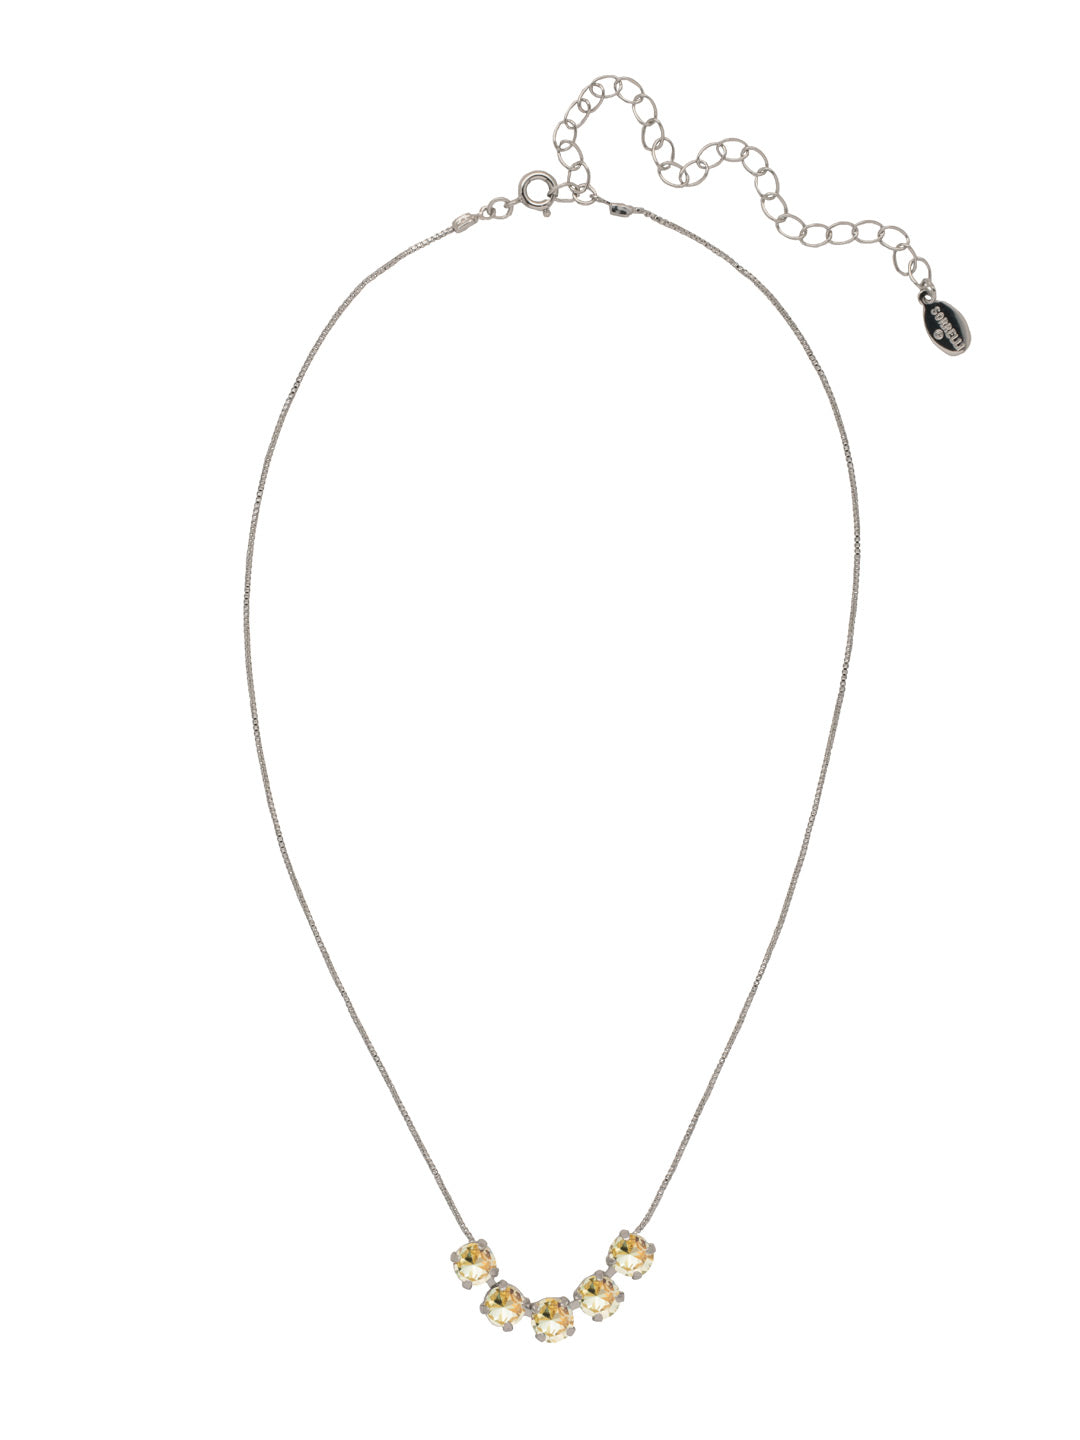 Shaughna Tennis Necklace - NFC84PDCCH - <p>The Shaughna Tennis Necklace features five crystals on a delicate adjustable chain. From Sorrelli's Crystal Champagne collection in our Palladium finish.</p>